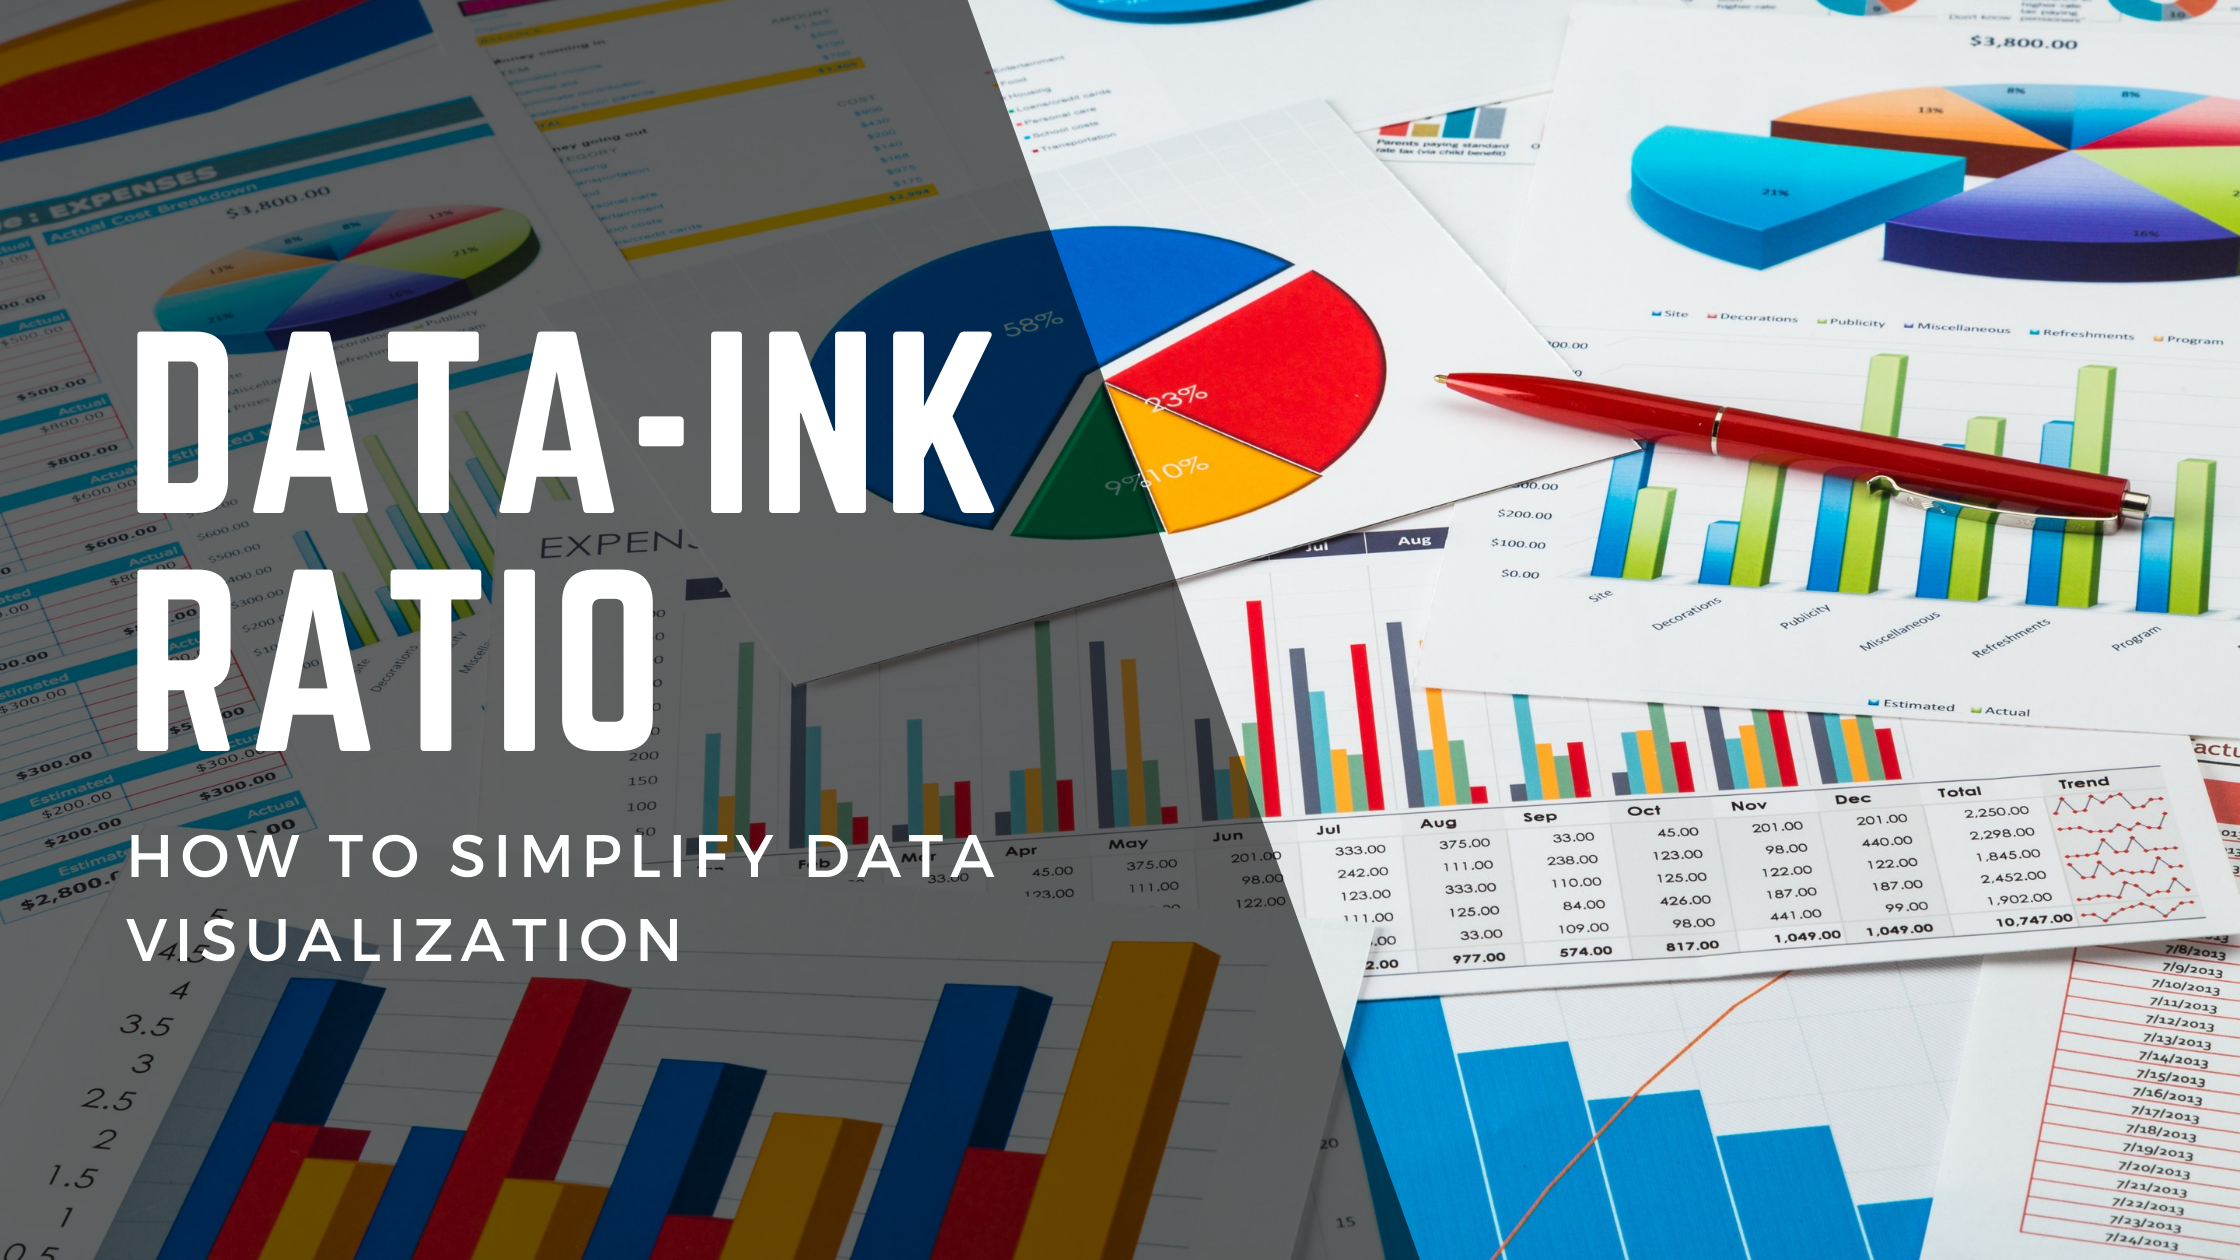 Data-ink Ratio: How to Simplify Data Visualization